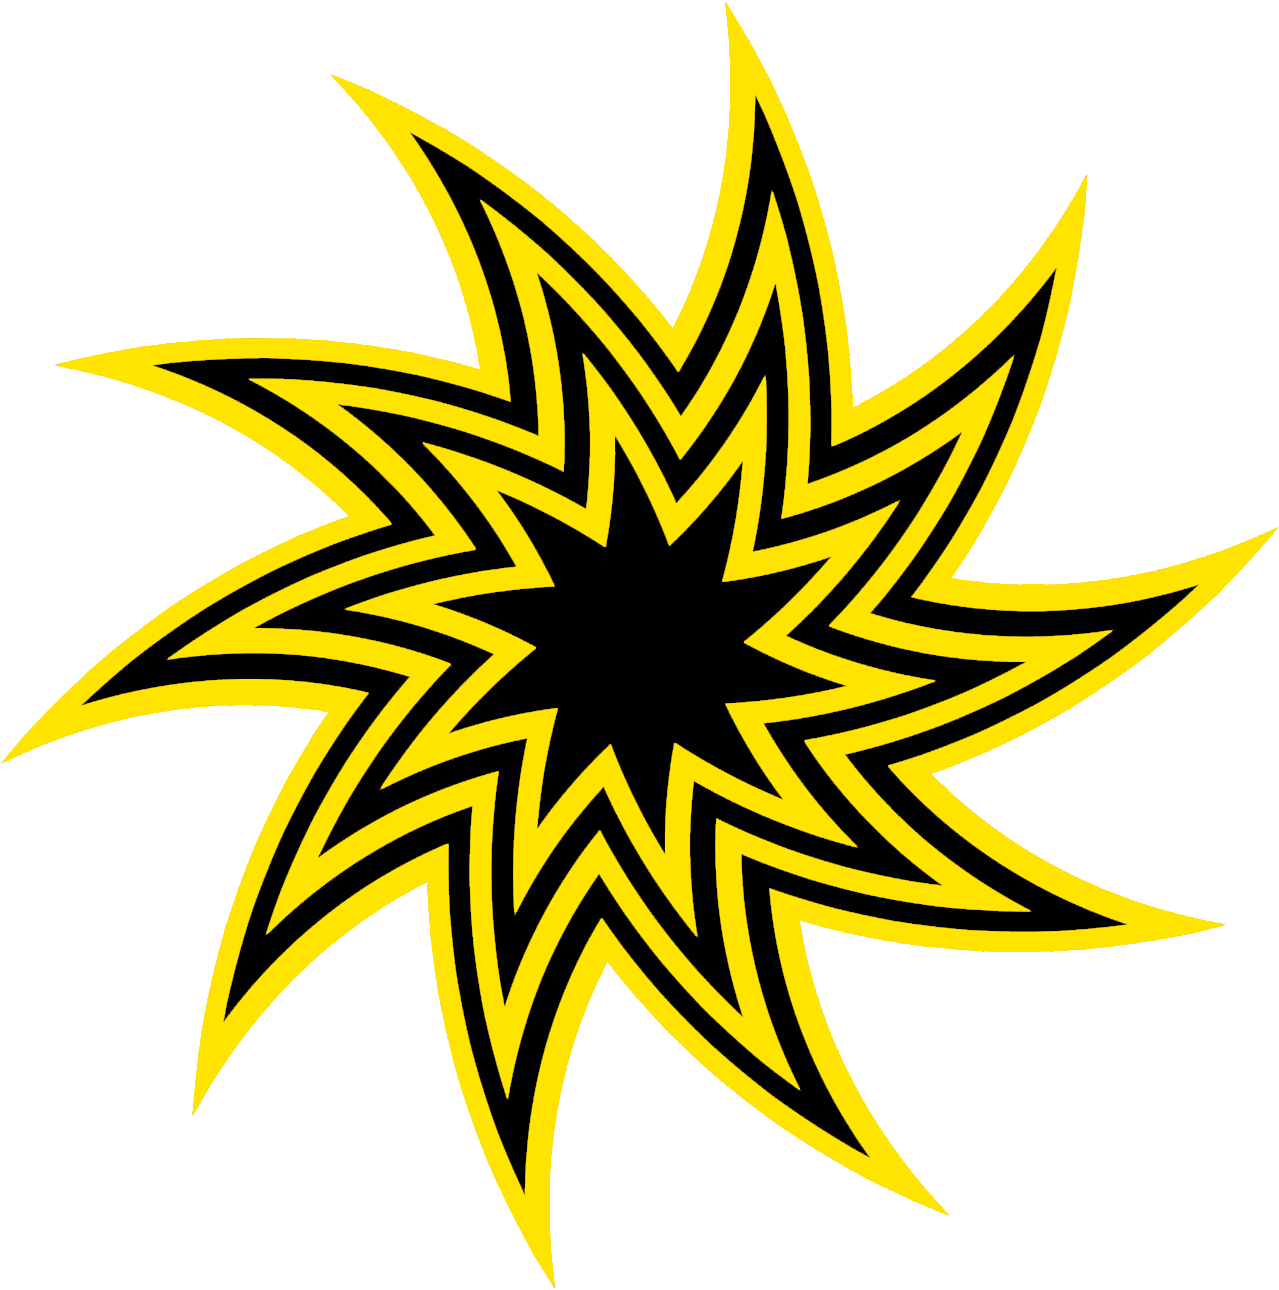 Black And Yellow Swirling Star Clipart - Black And White Swirling Star (1476x1476)